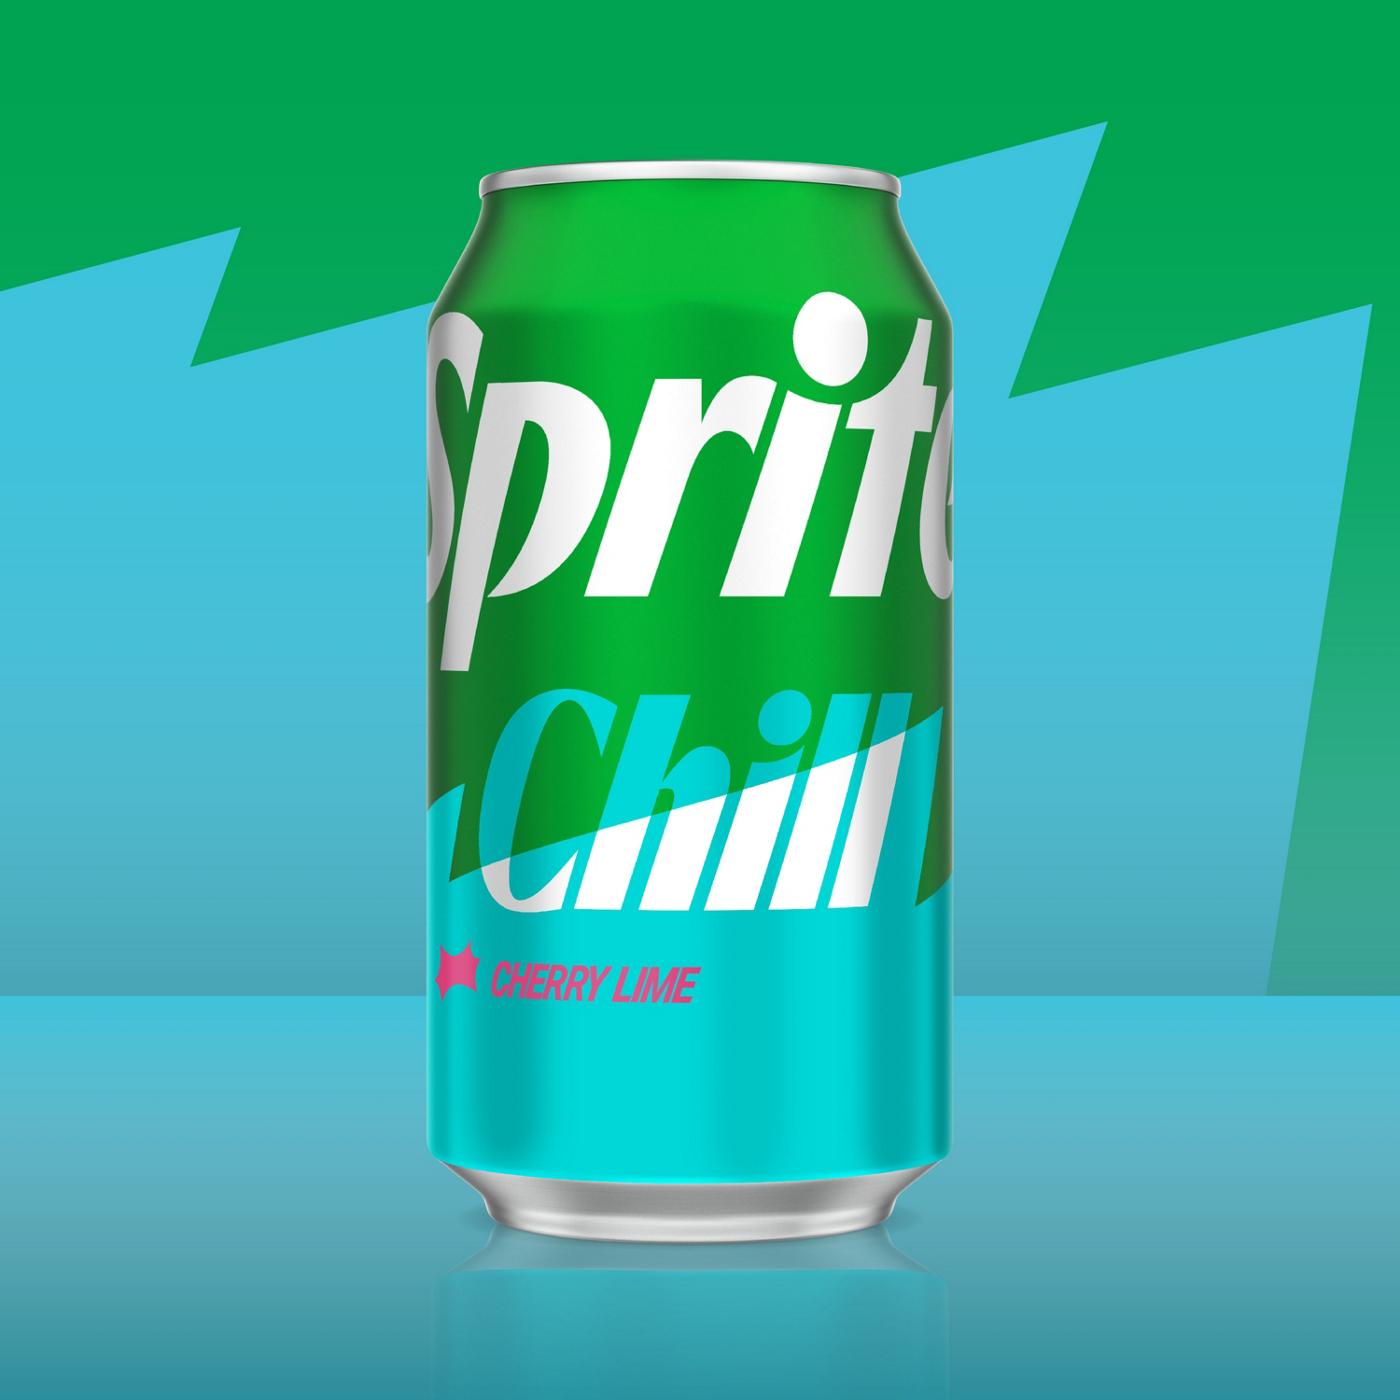 Sprite Chill Cherry Lime, 12 pk Cans; image 7 of 7